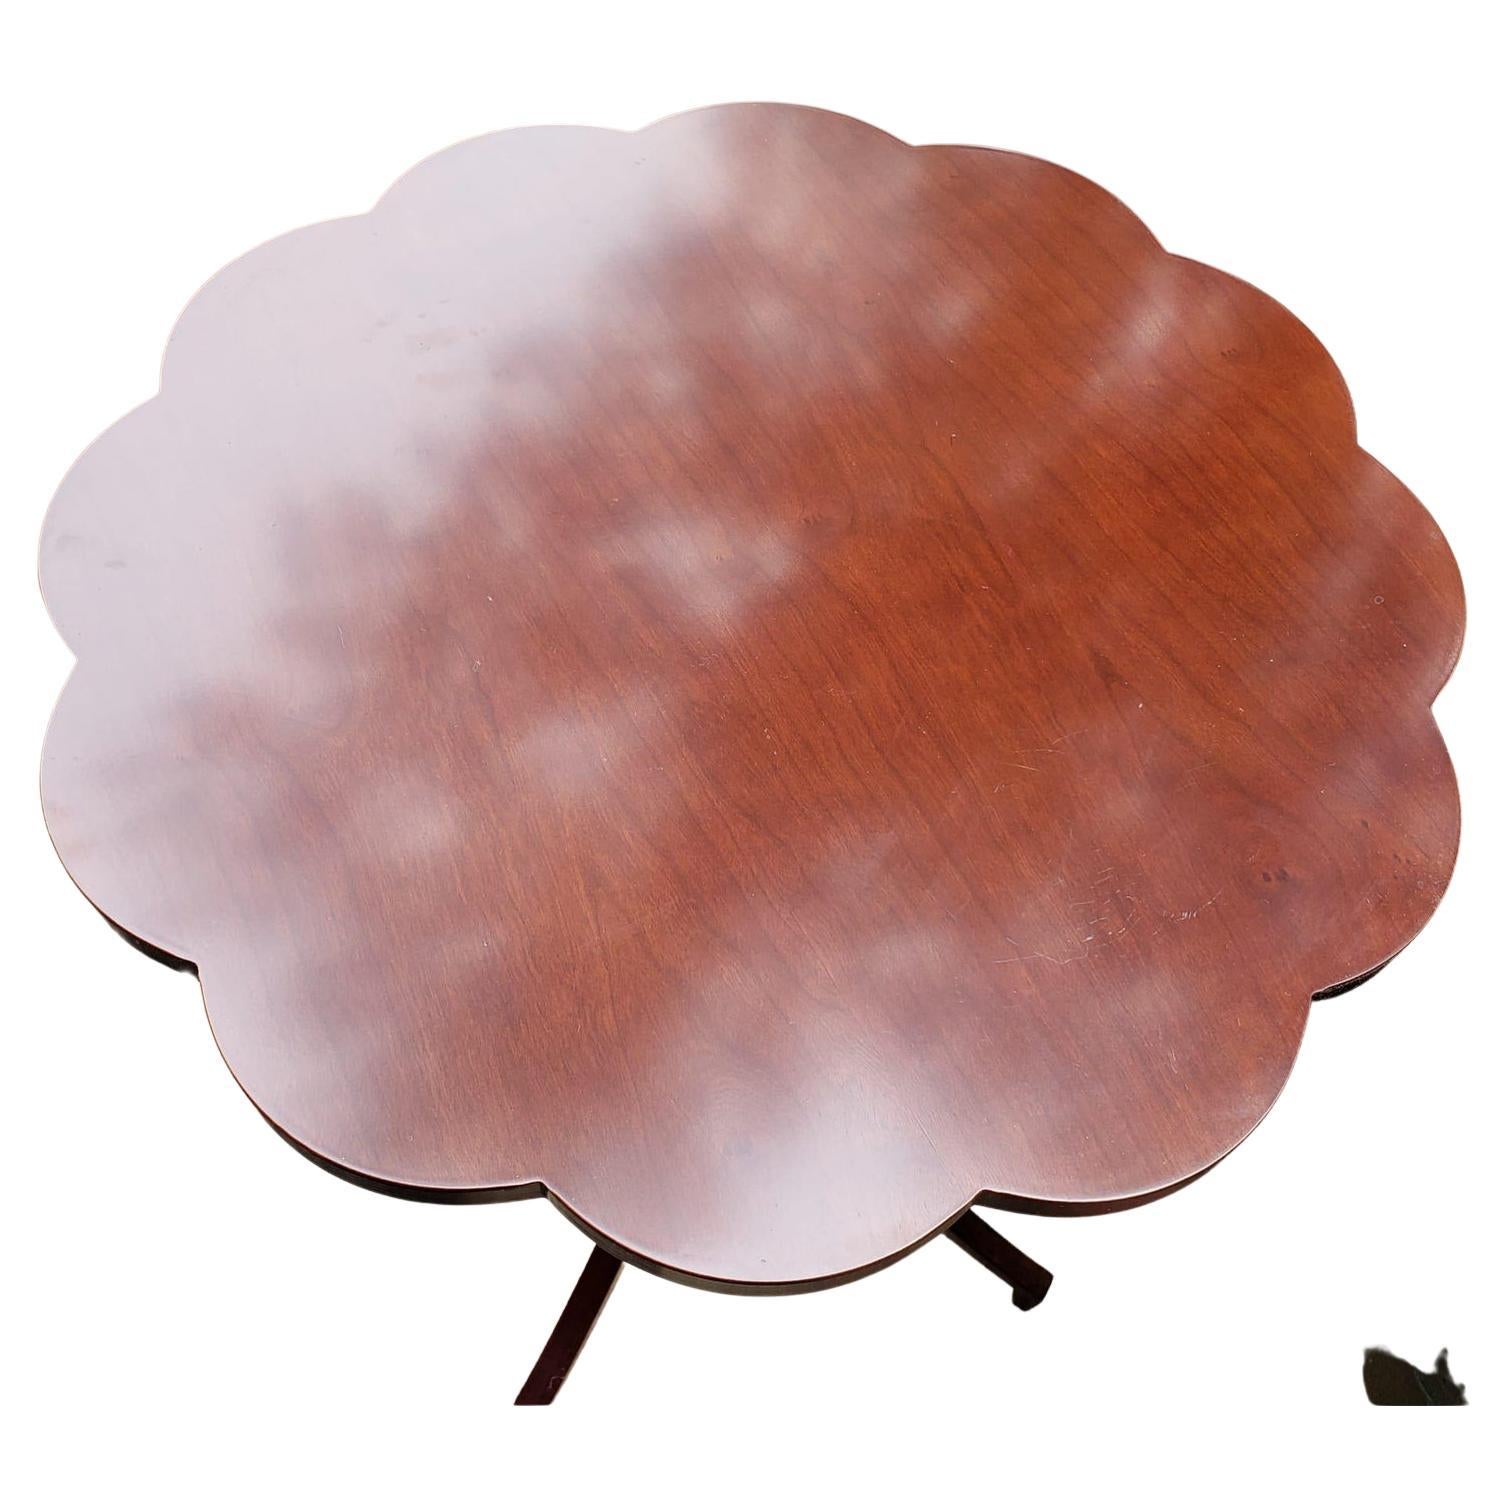 Malaysian Bombay Mahogany Stained Wood Scallop Edge Accent Table, Circa 1993